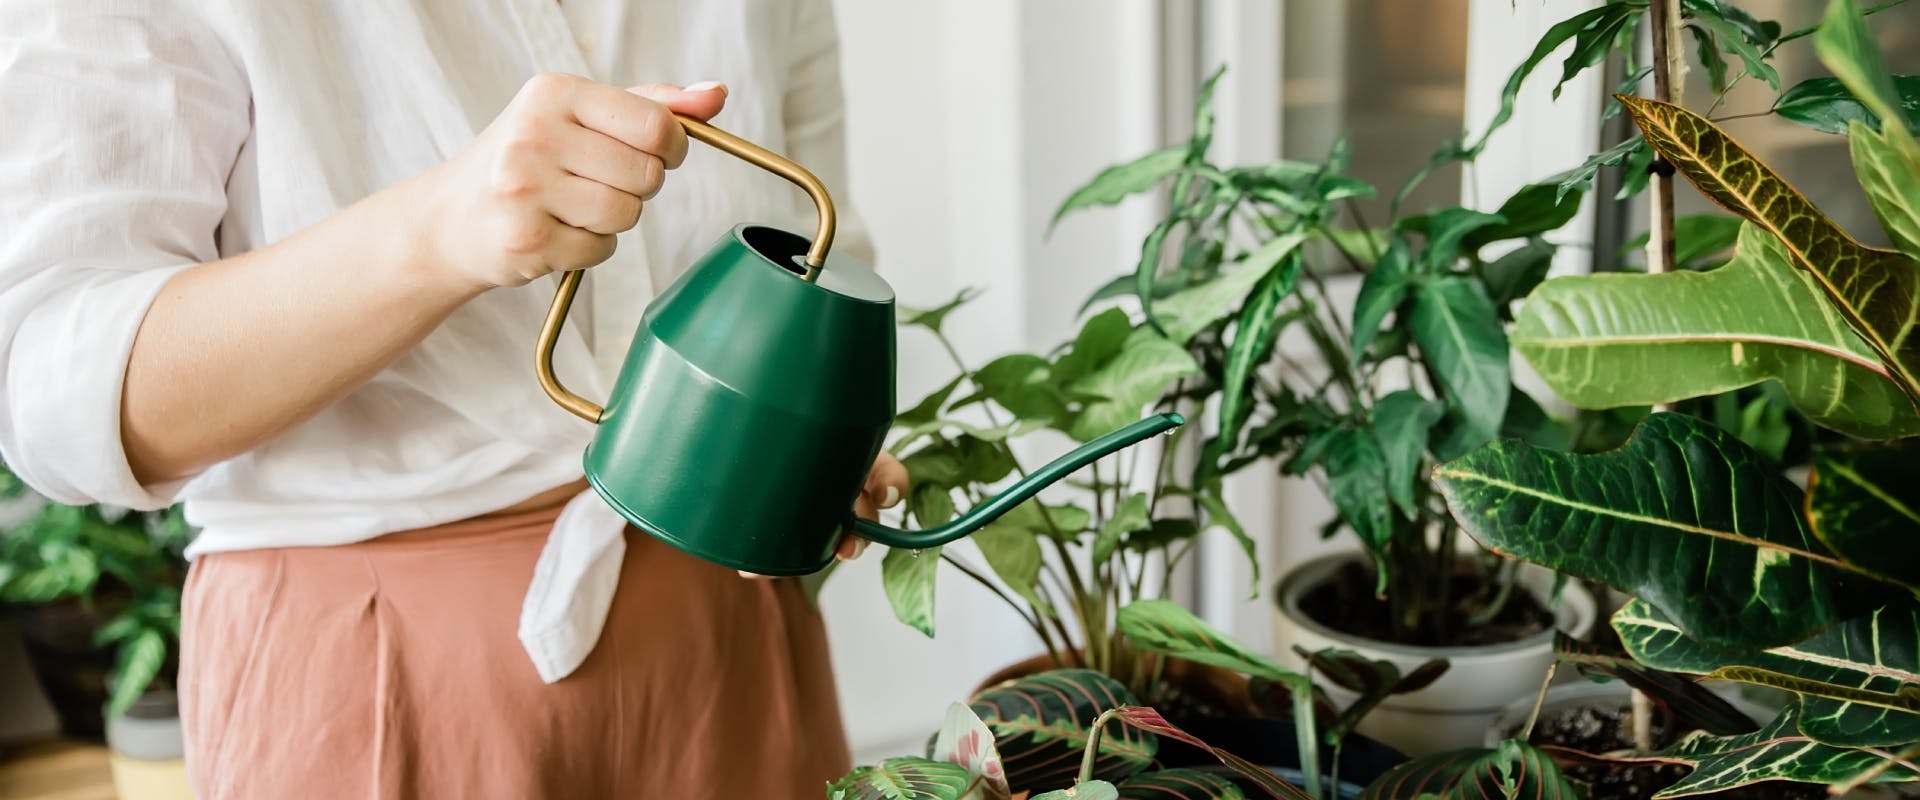 A woman waters some indoor plants.